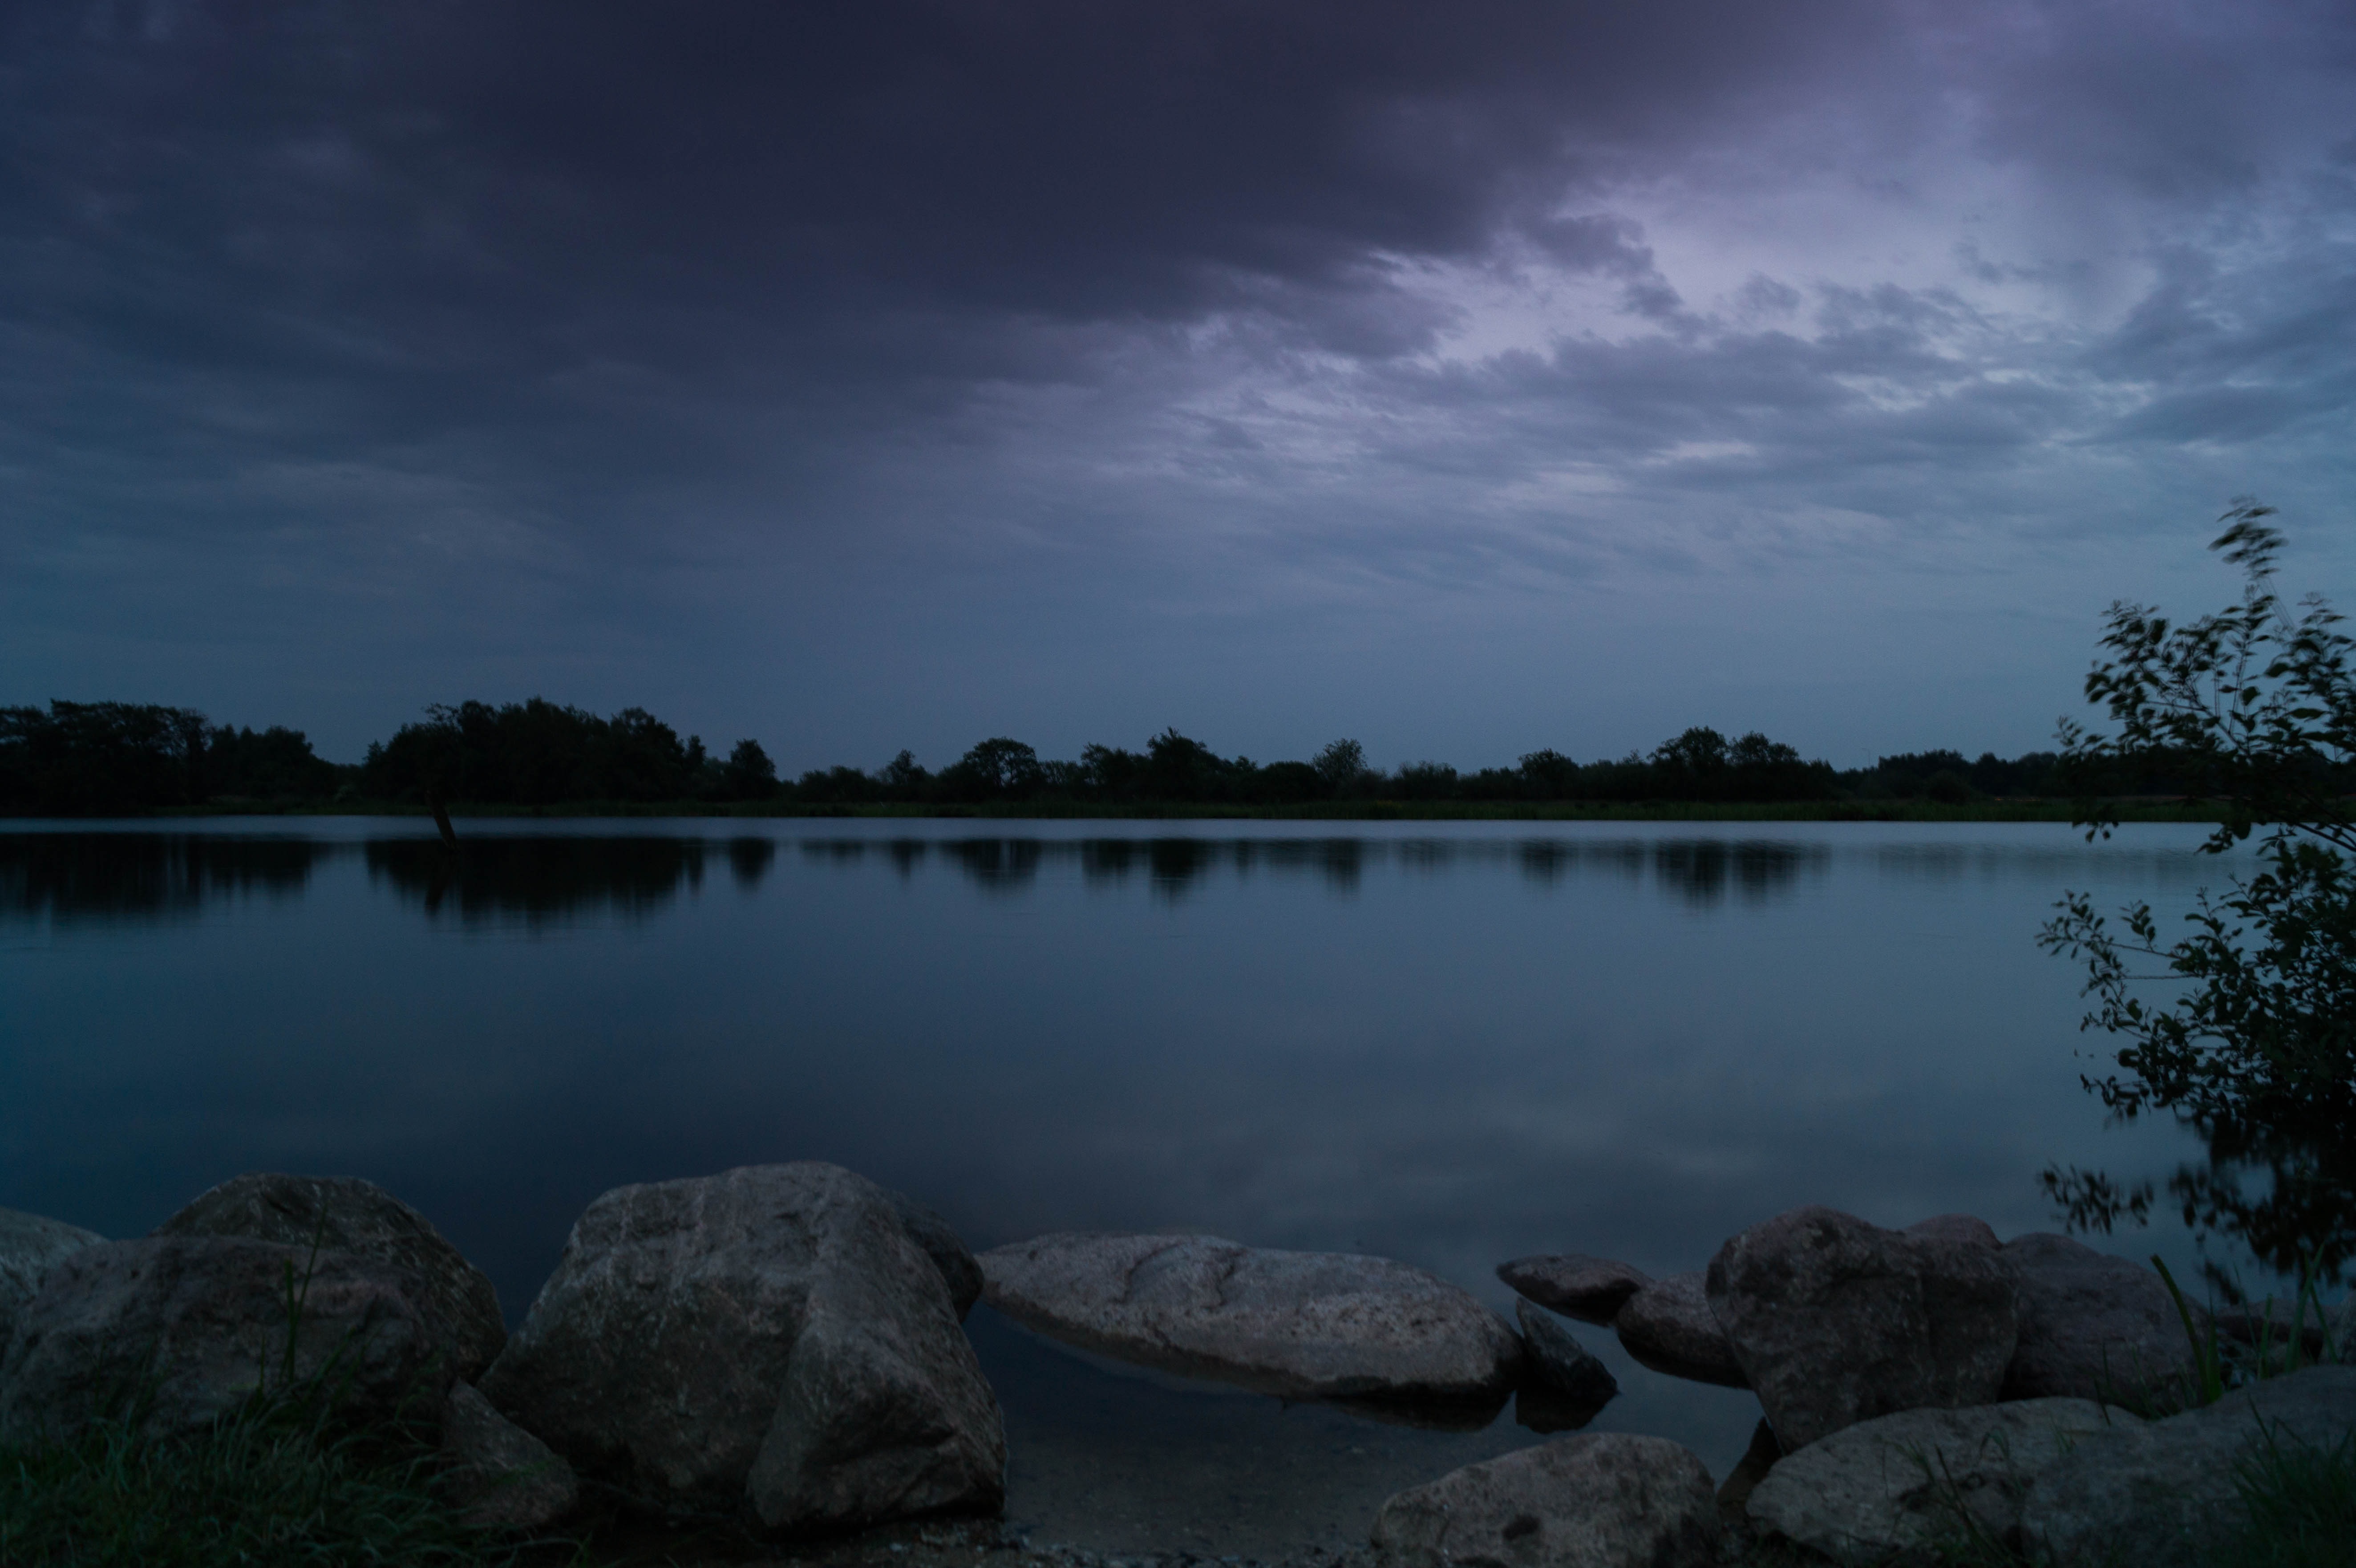 Lake in the evening photo